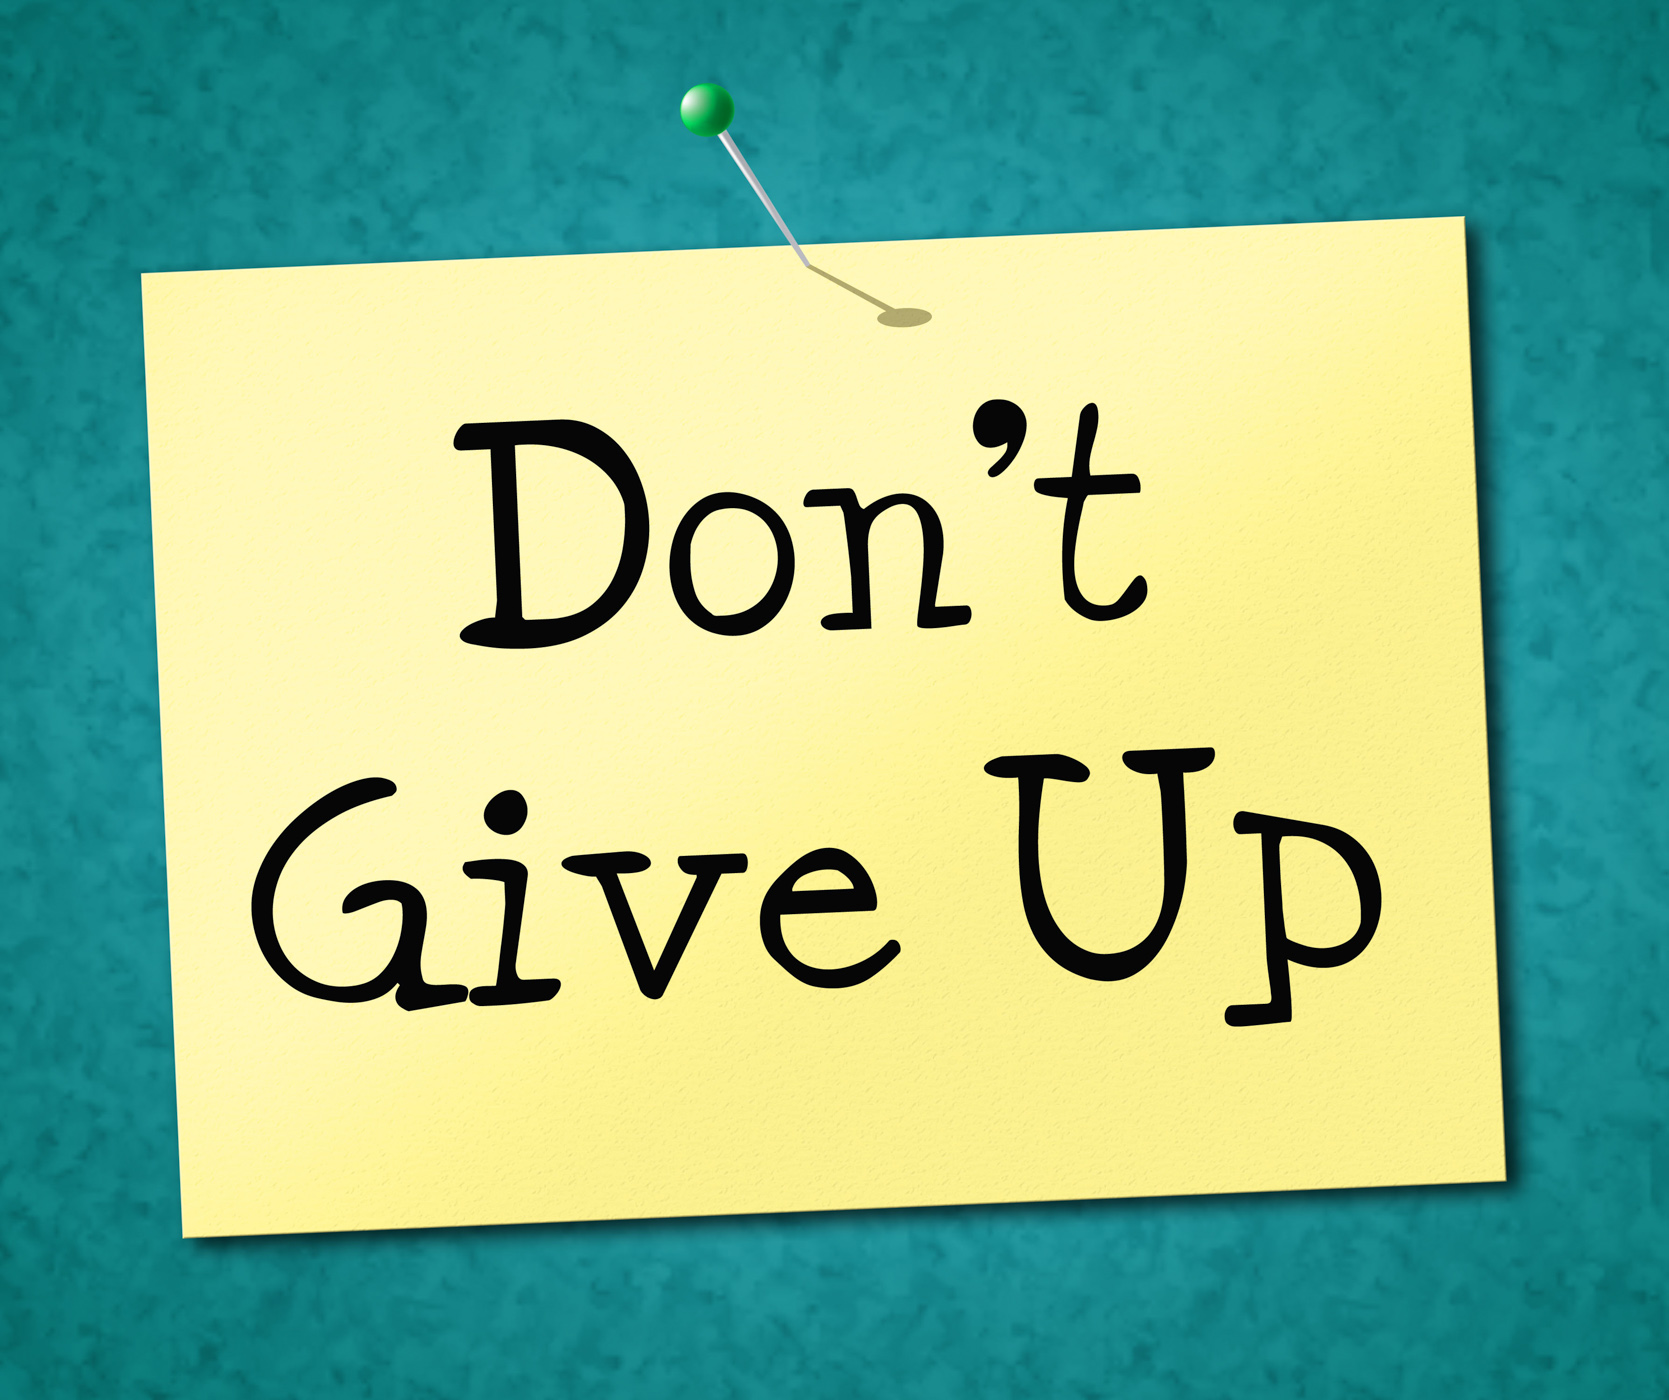 Dont give up represents motivate commitment and succeed photo